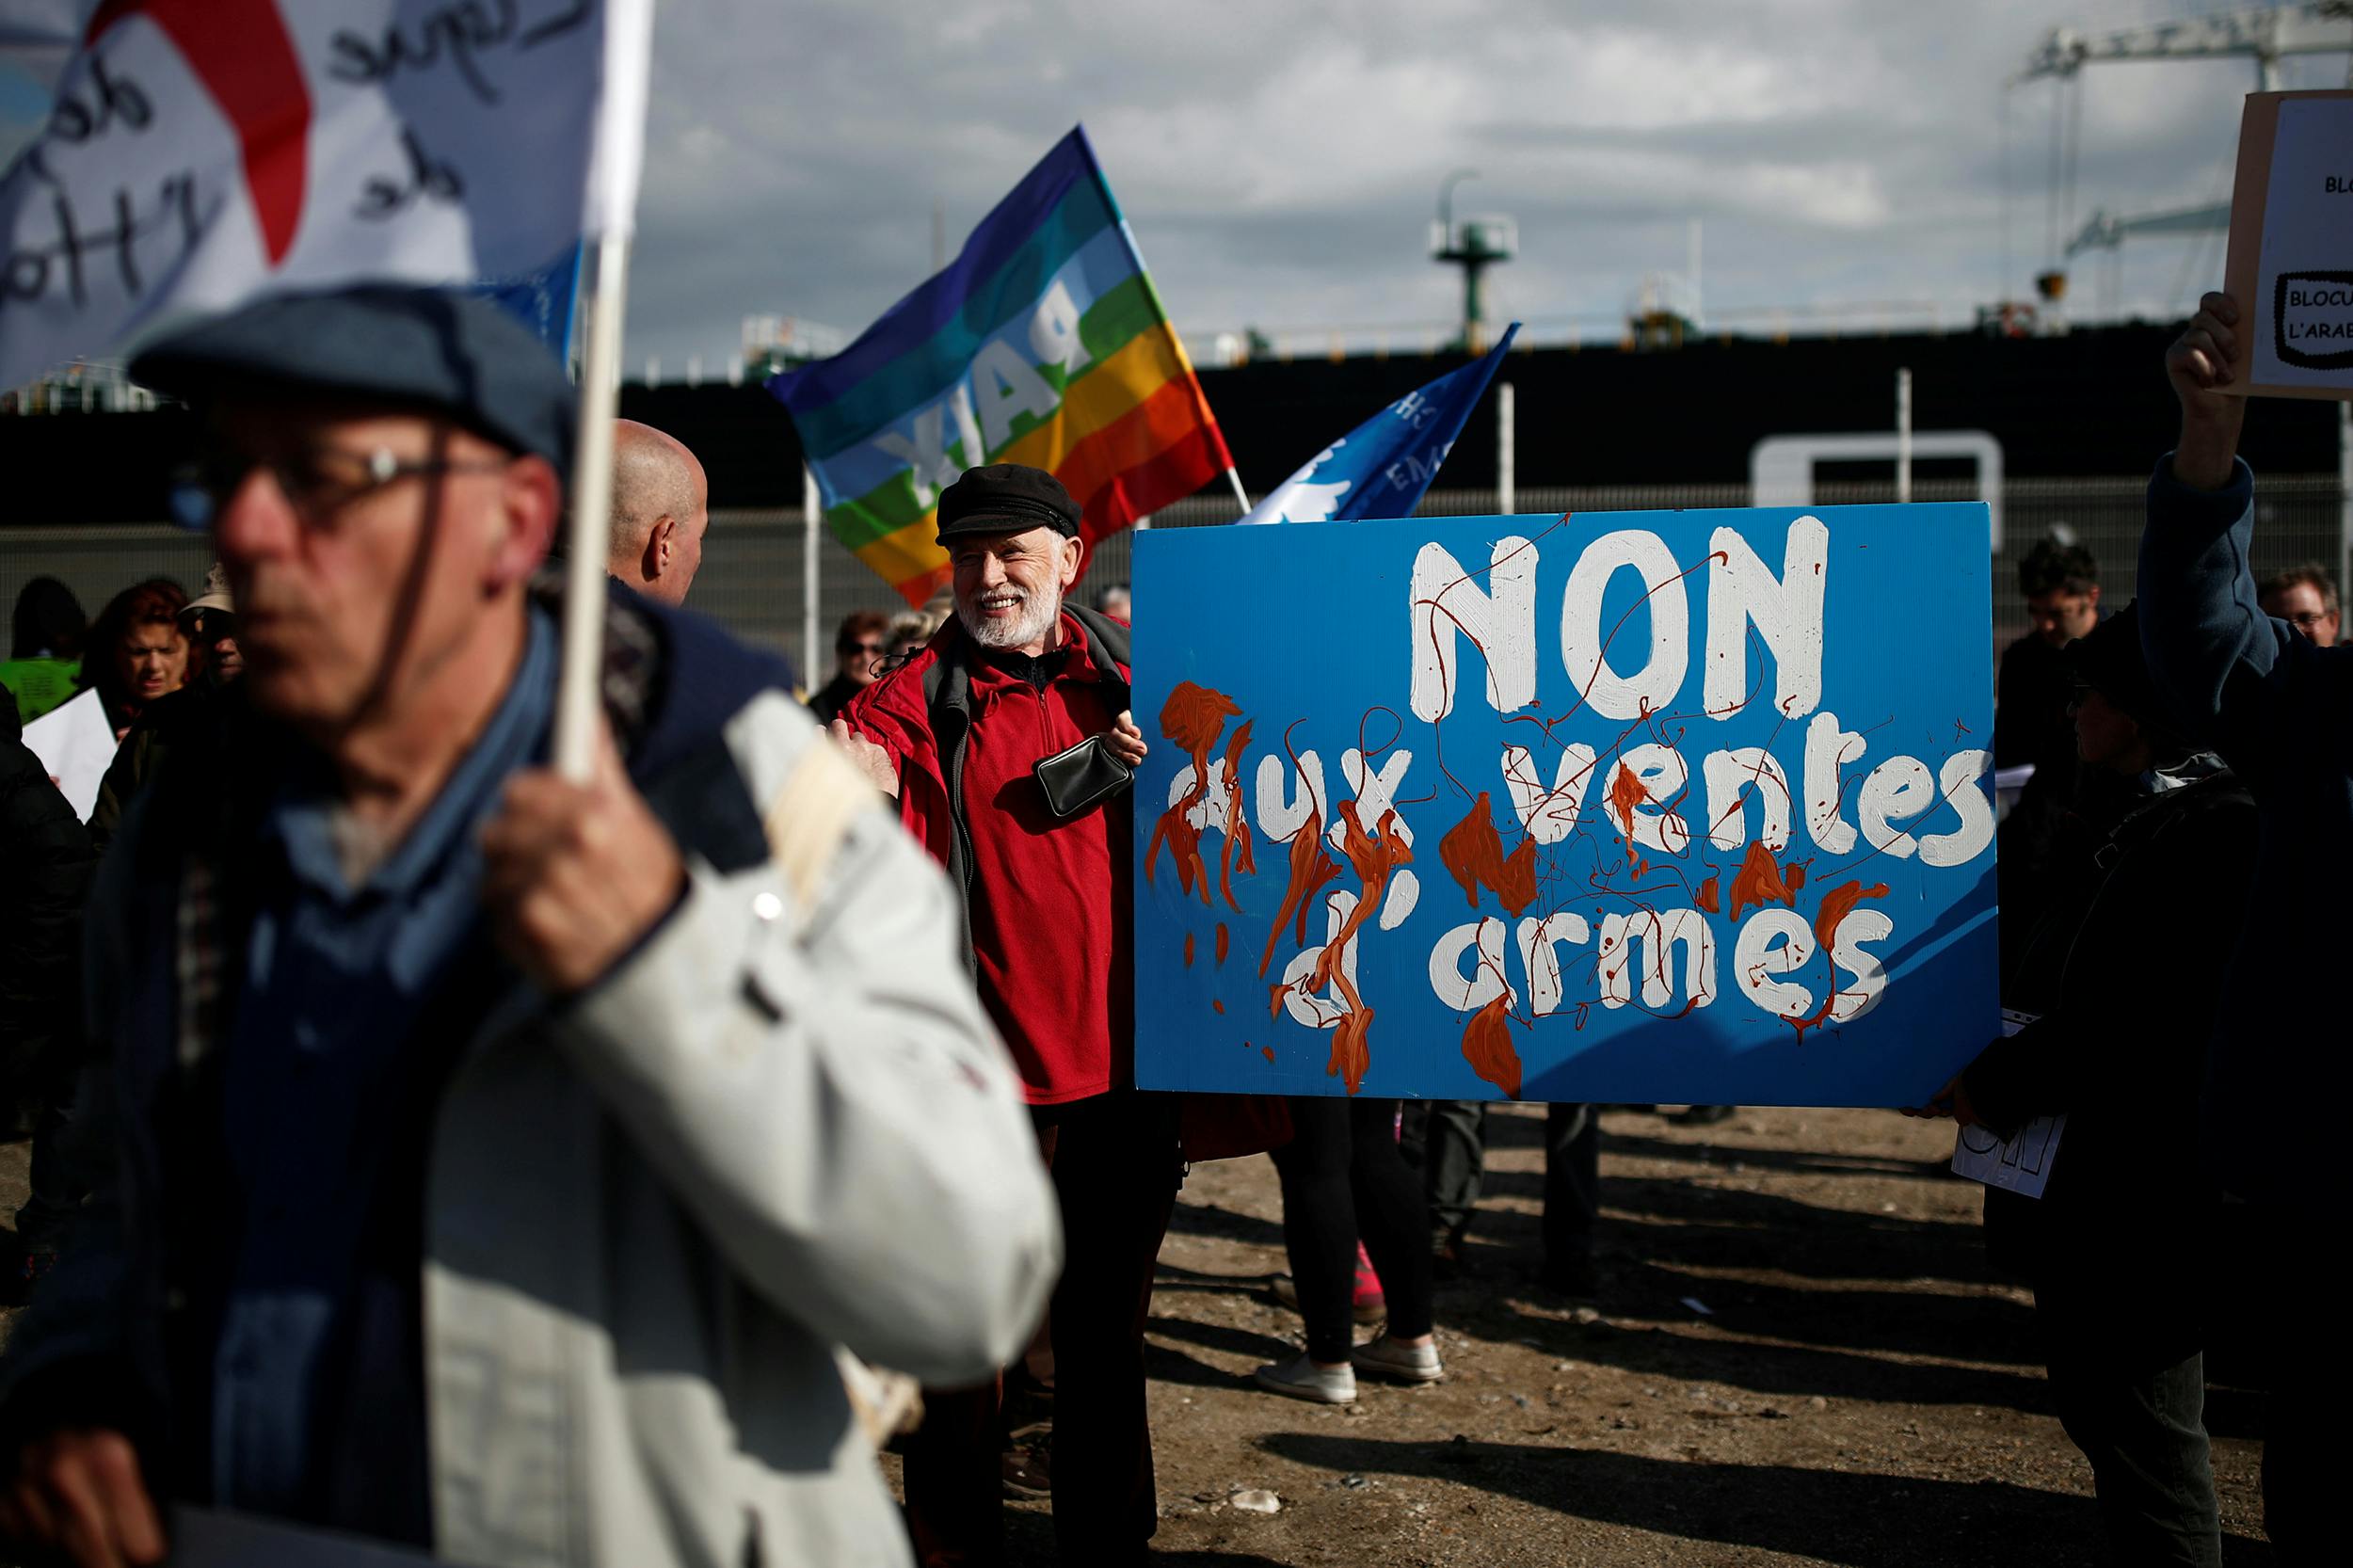 People attend a demonstration to protest against the loading of weapons aboard the Bahri-Yanbu, a cargo ship operating for Saudi Arabia's defence and interior ministries, in Le Havre, France, May 9, 2019. The banner reads: "No to arms sales". 